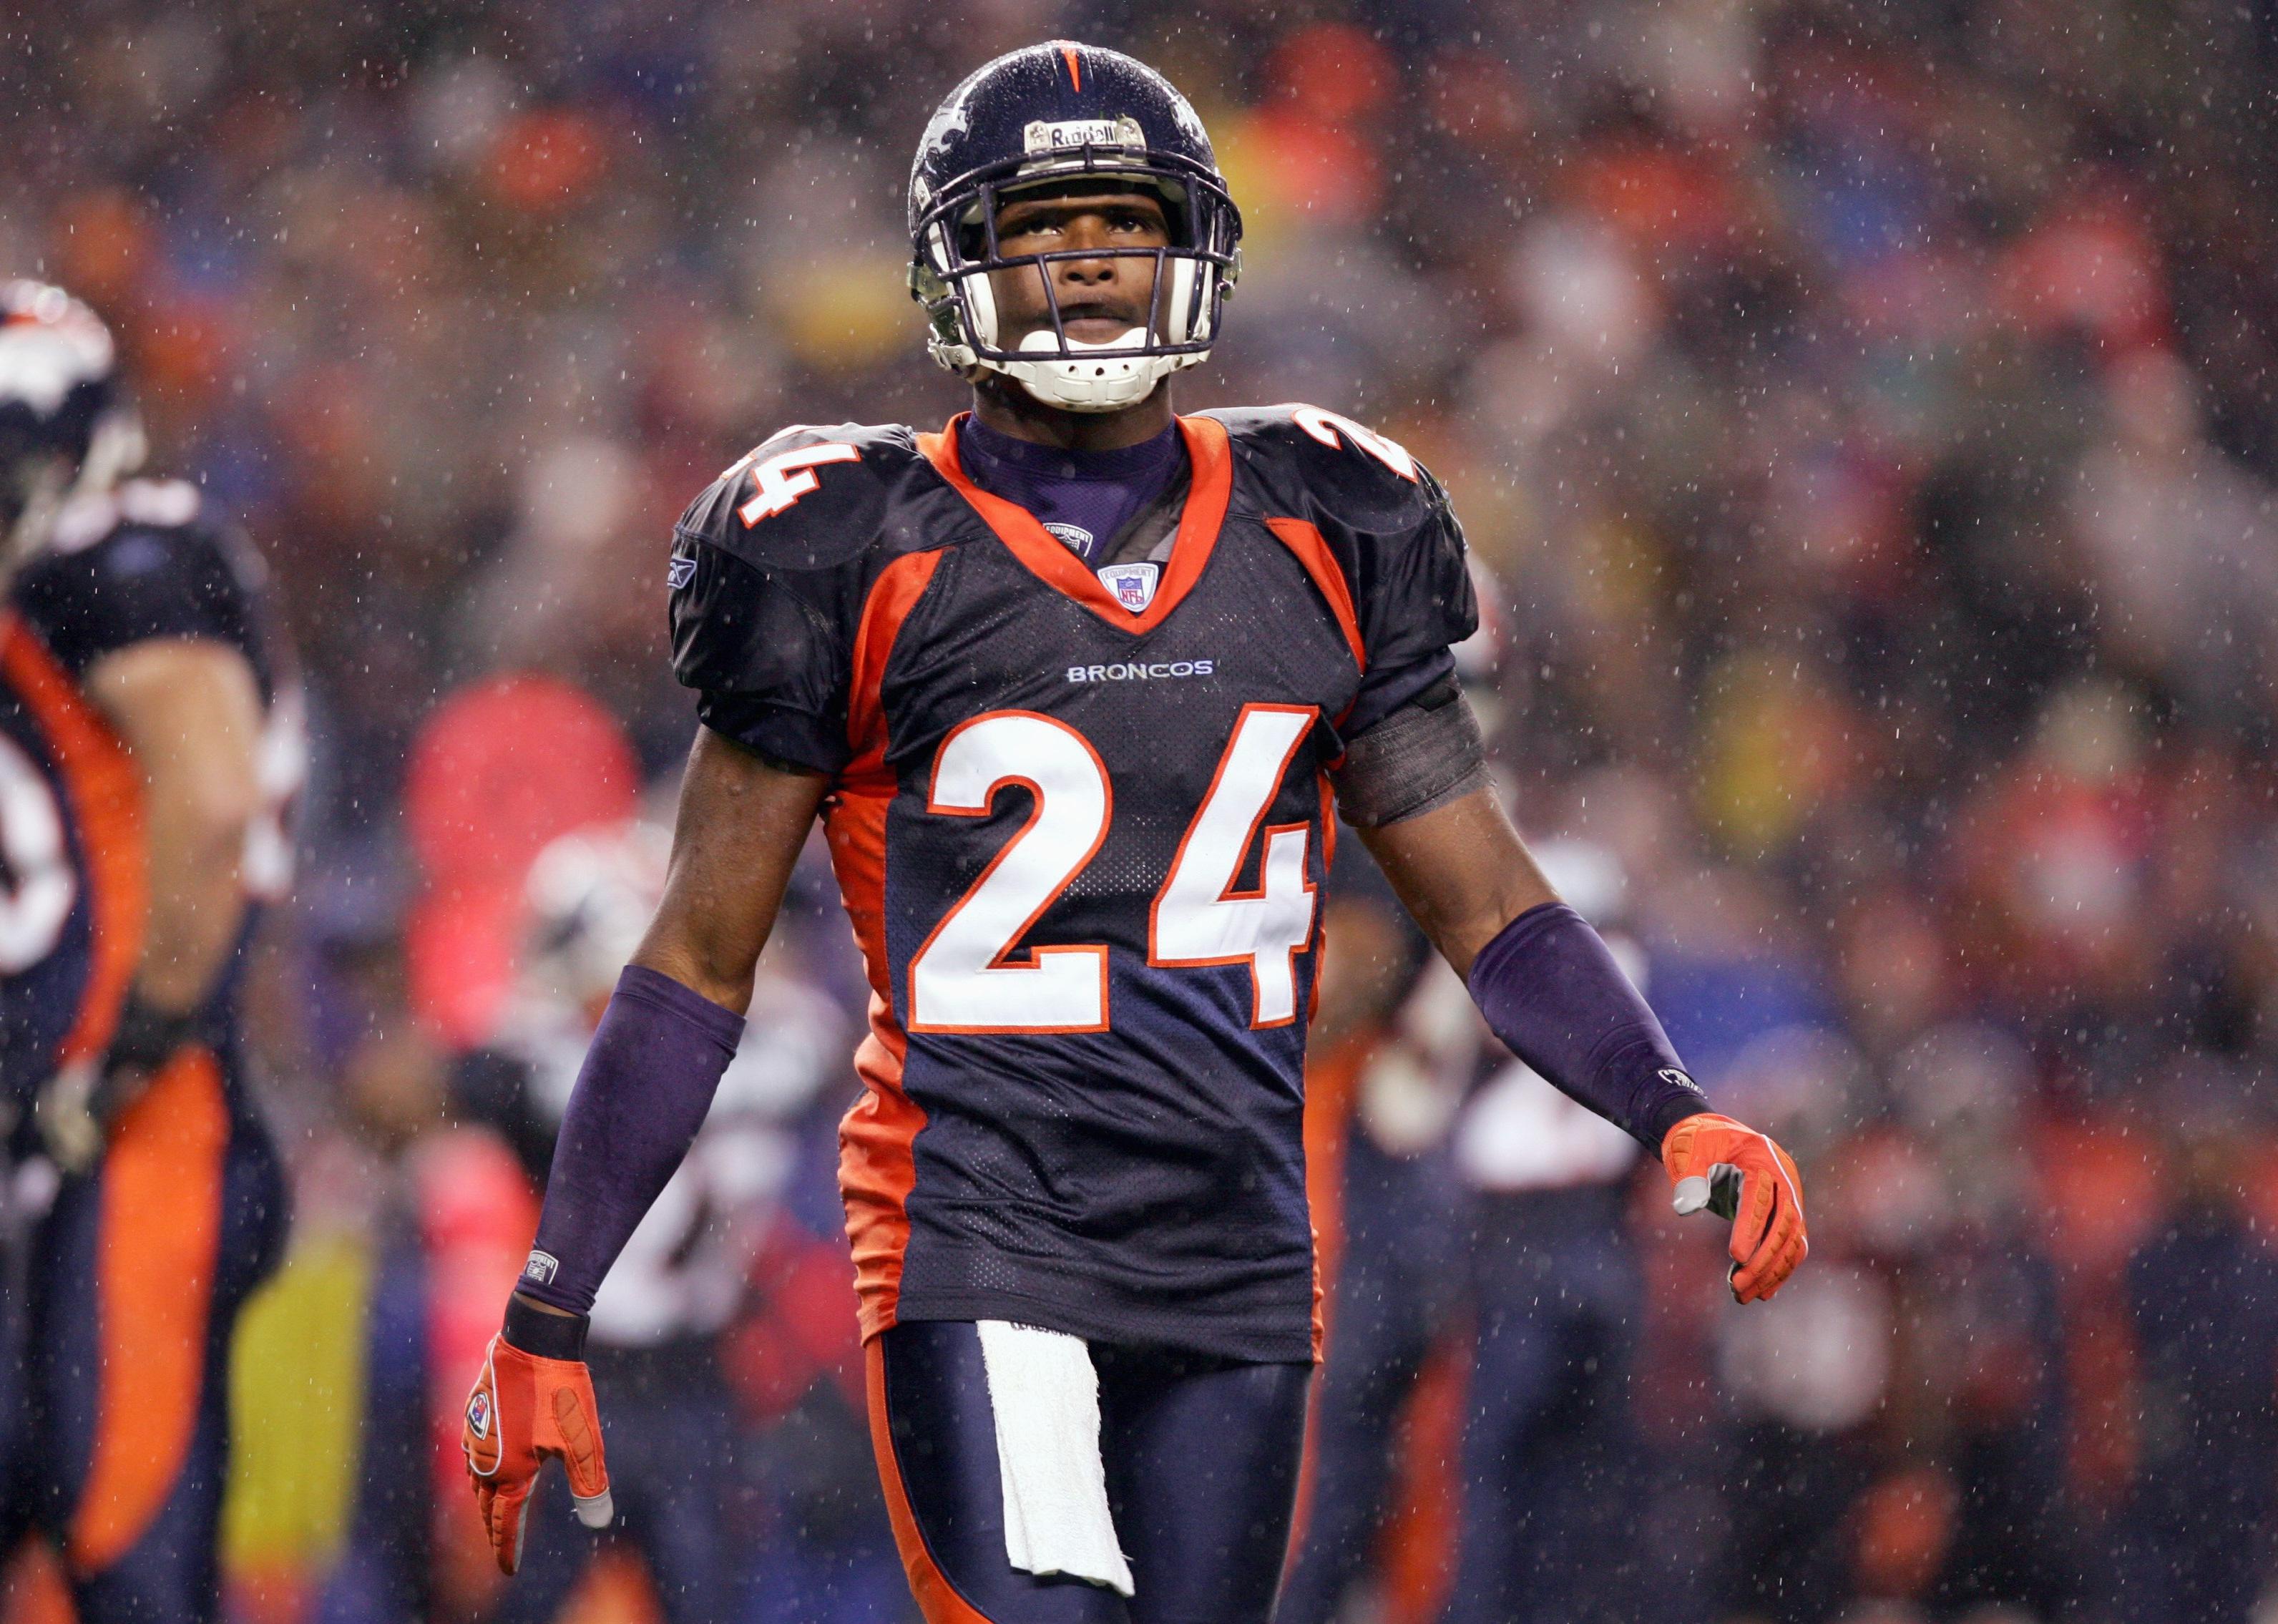 Champ Bailey of the Denver Broncos walks on the field 